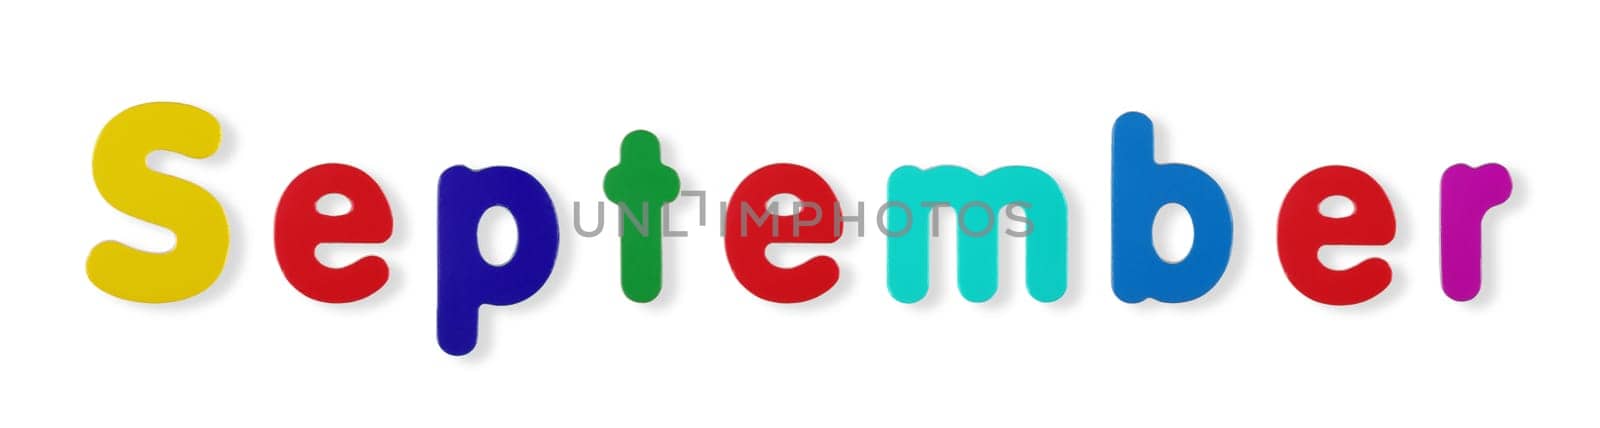 A September word in coloured magnetic letters on white with clipping path to remove shadow